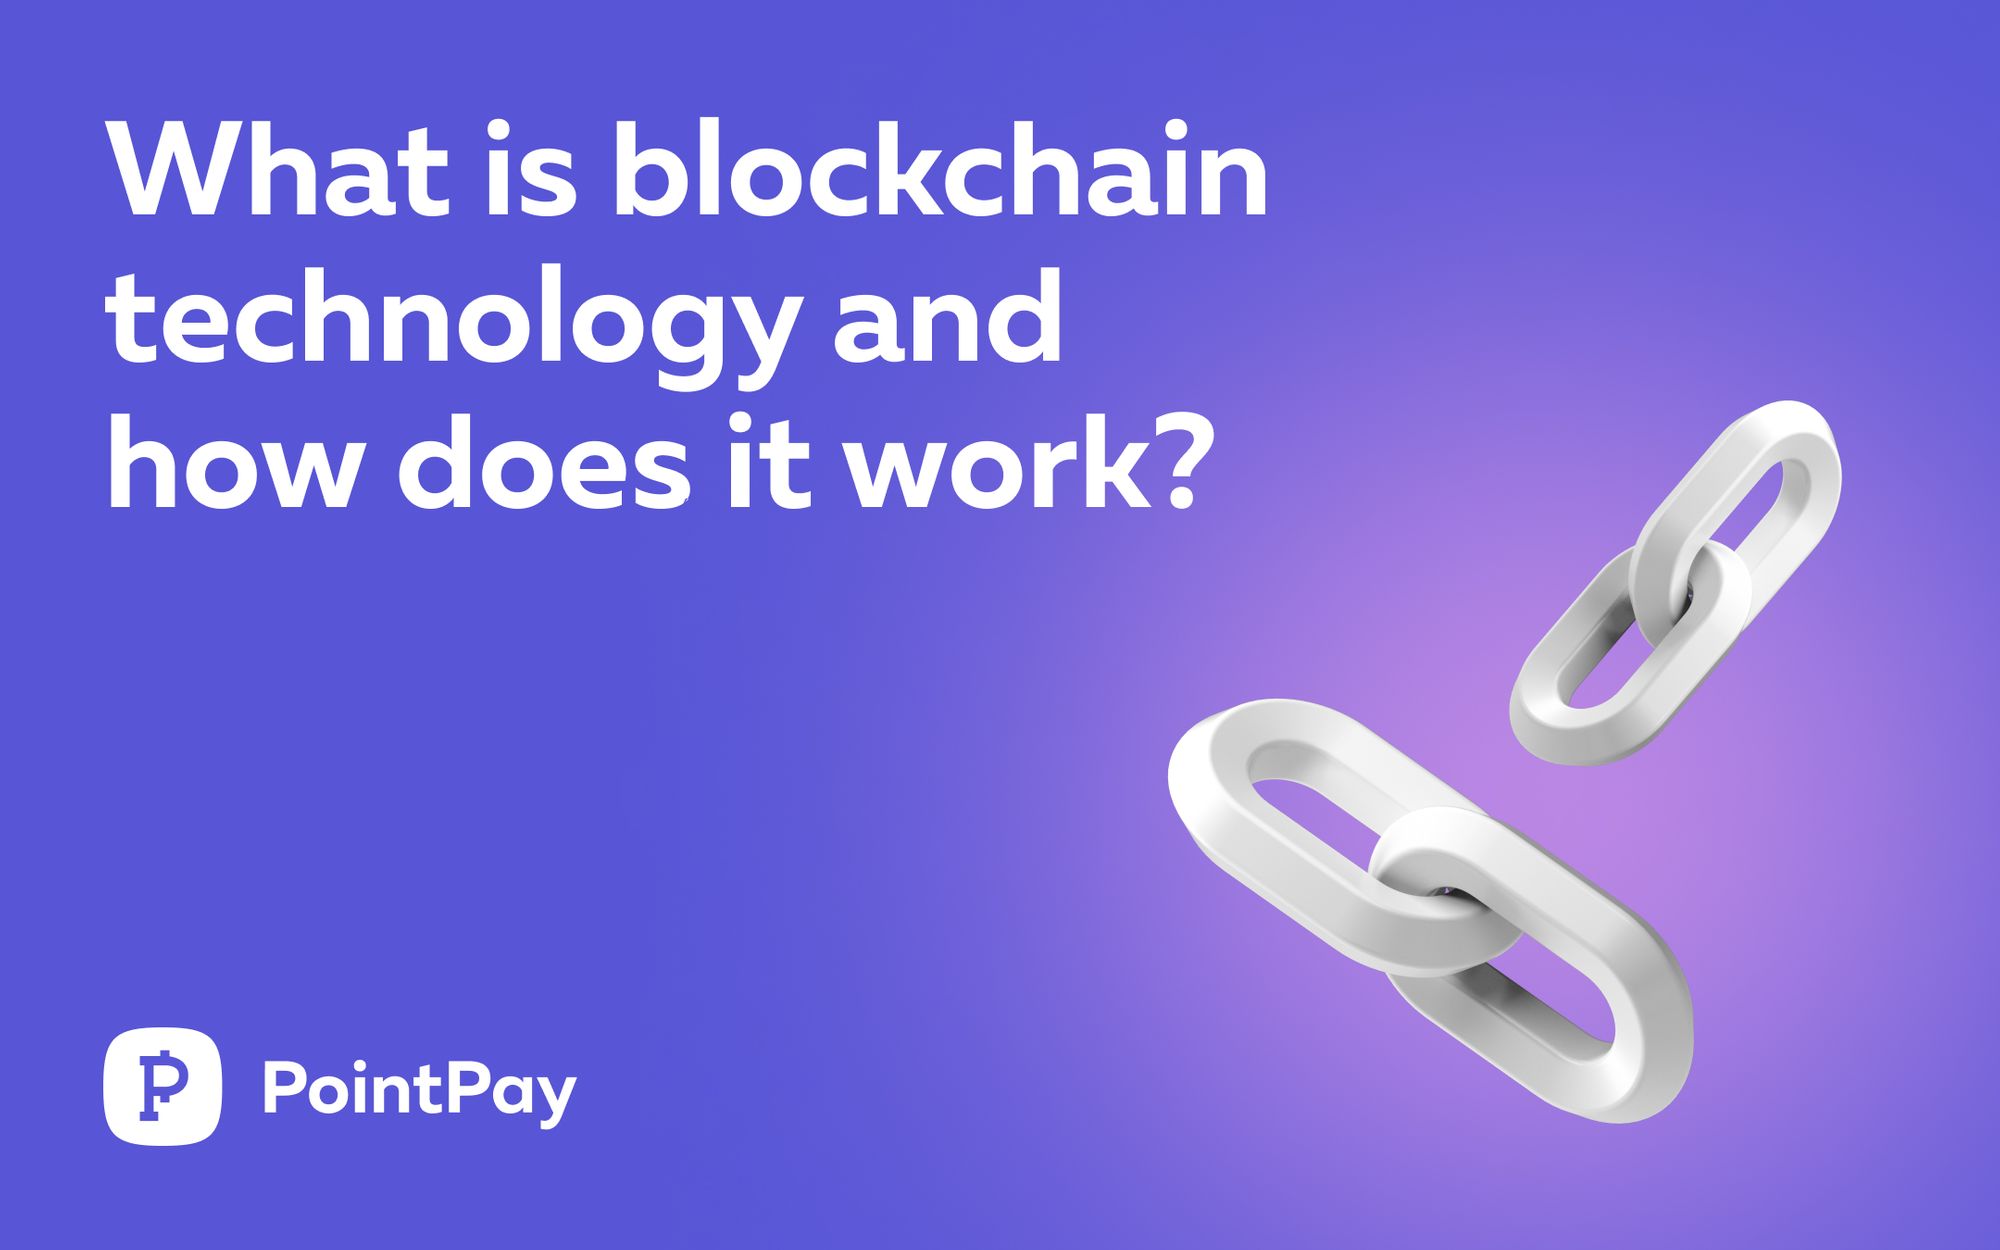 What is blockchain technology, and how does it work